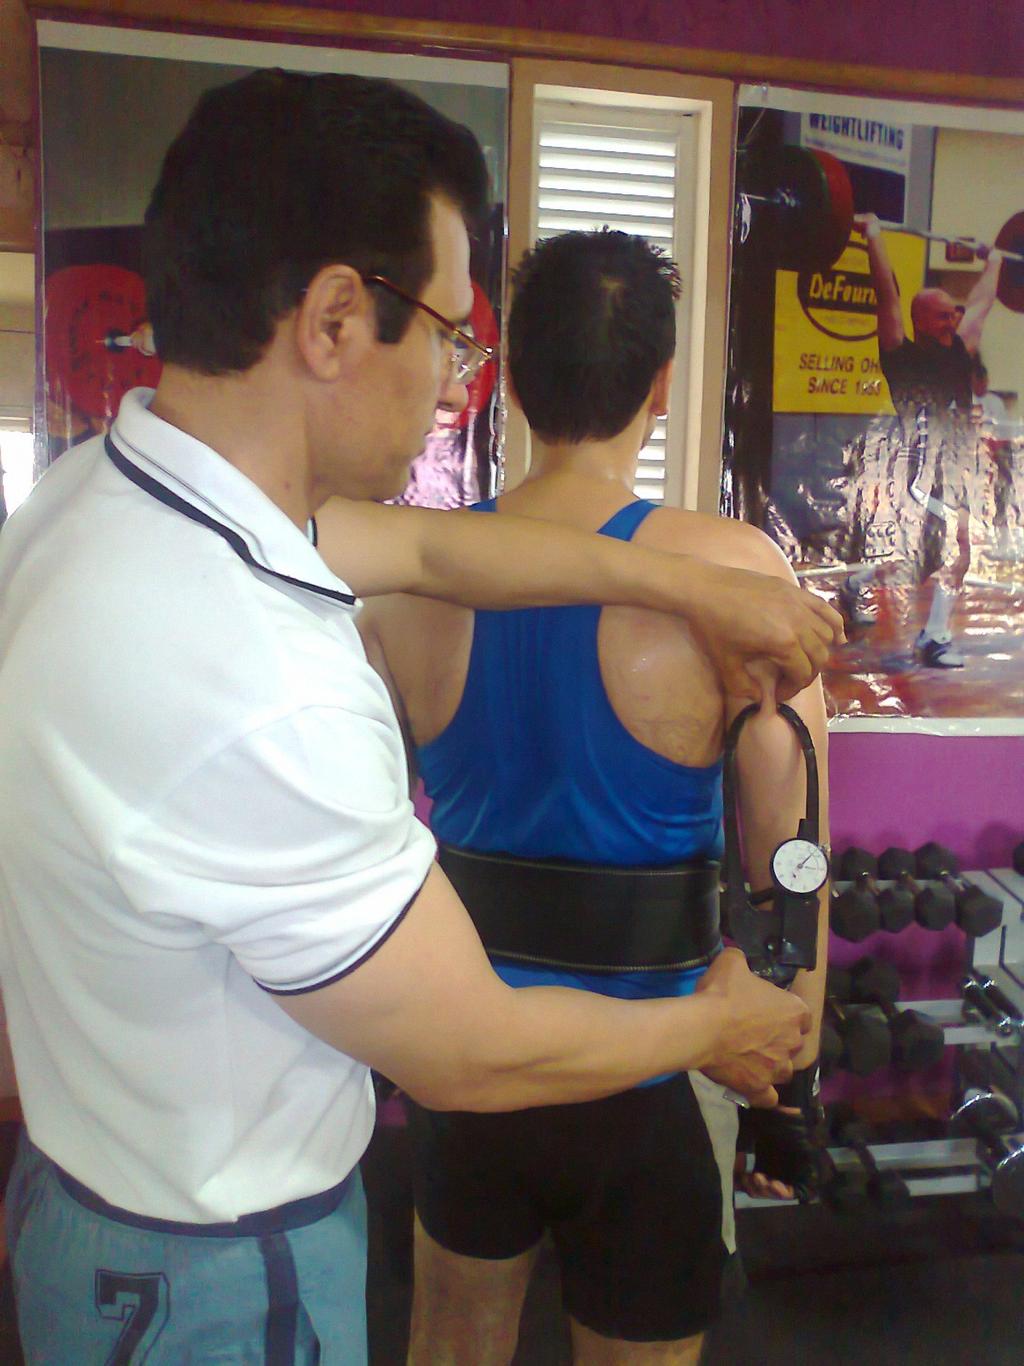 1. Triceps grasp a vertical fold of skin, on the posterior side of your arm (your triceps) at the midline.